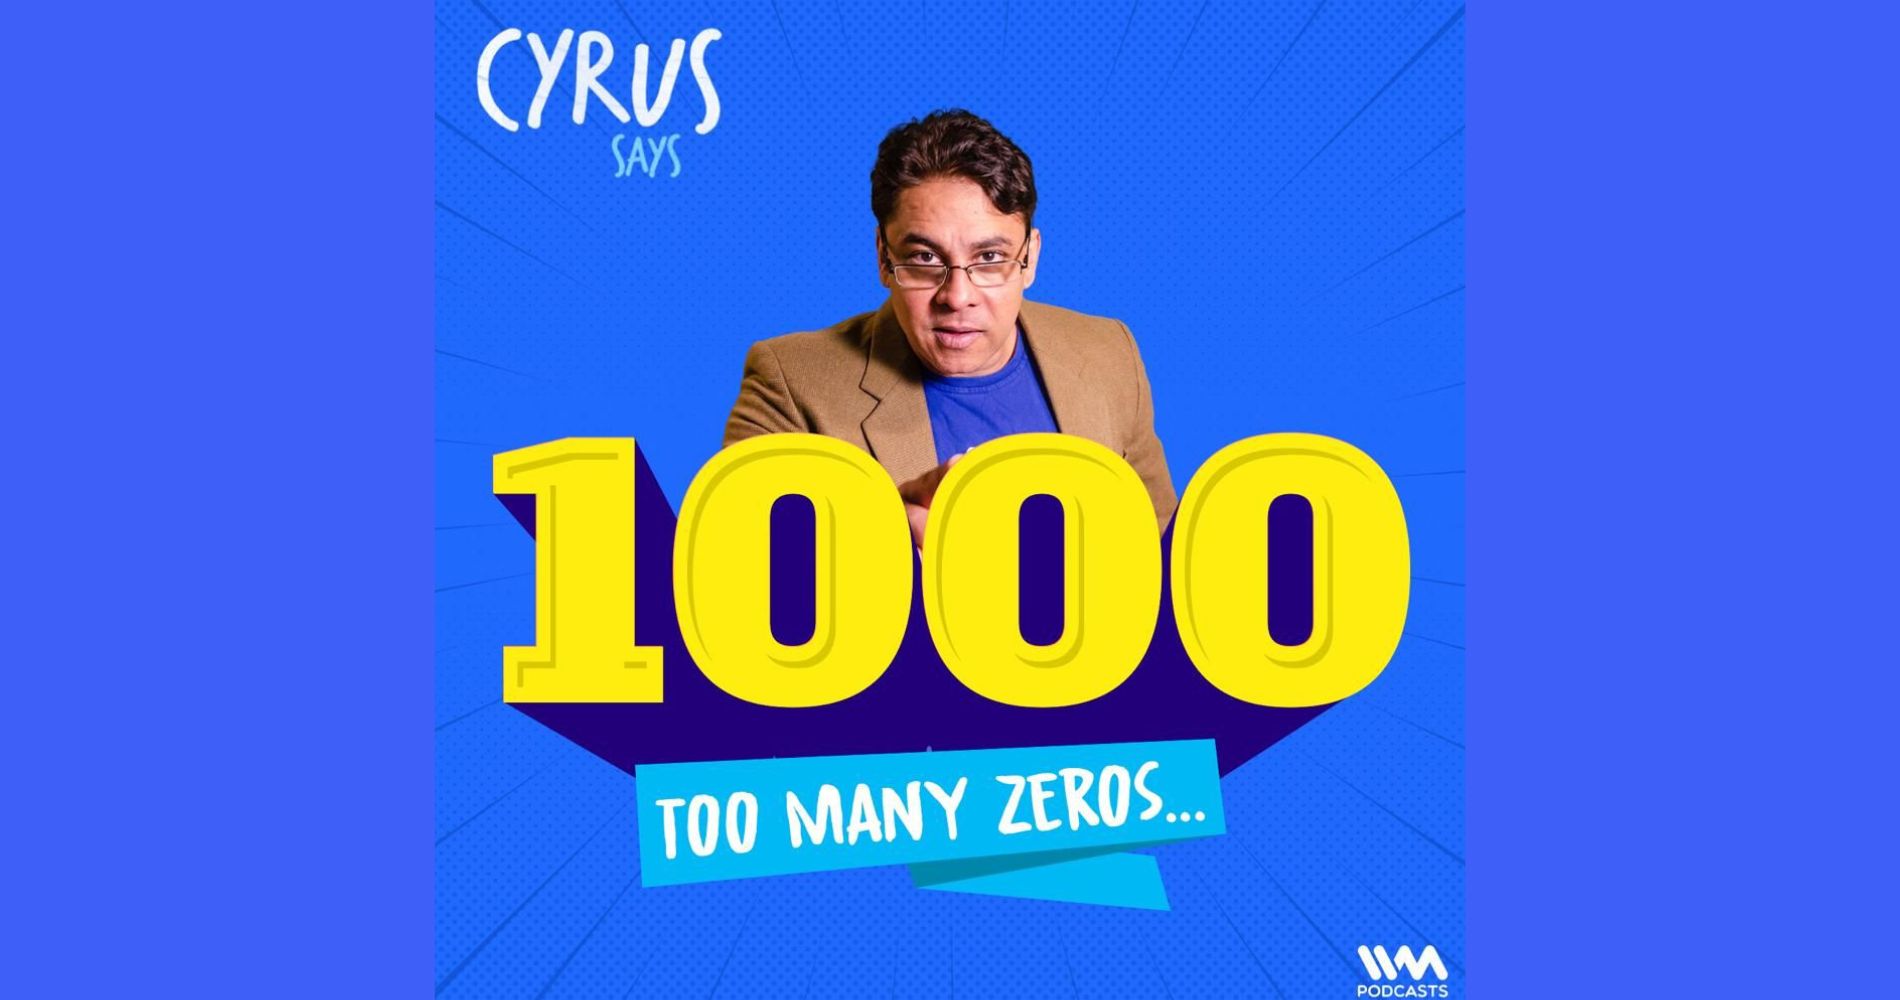 Cyrus says becomes India's longest-running Podcast; Crosses the 1000-Episode Mark